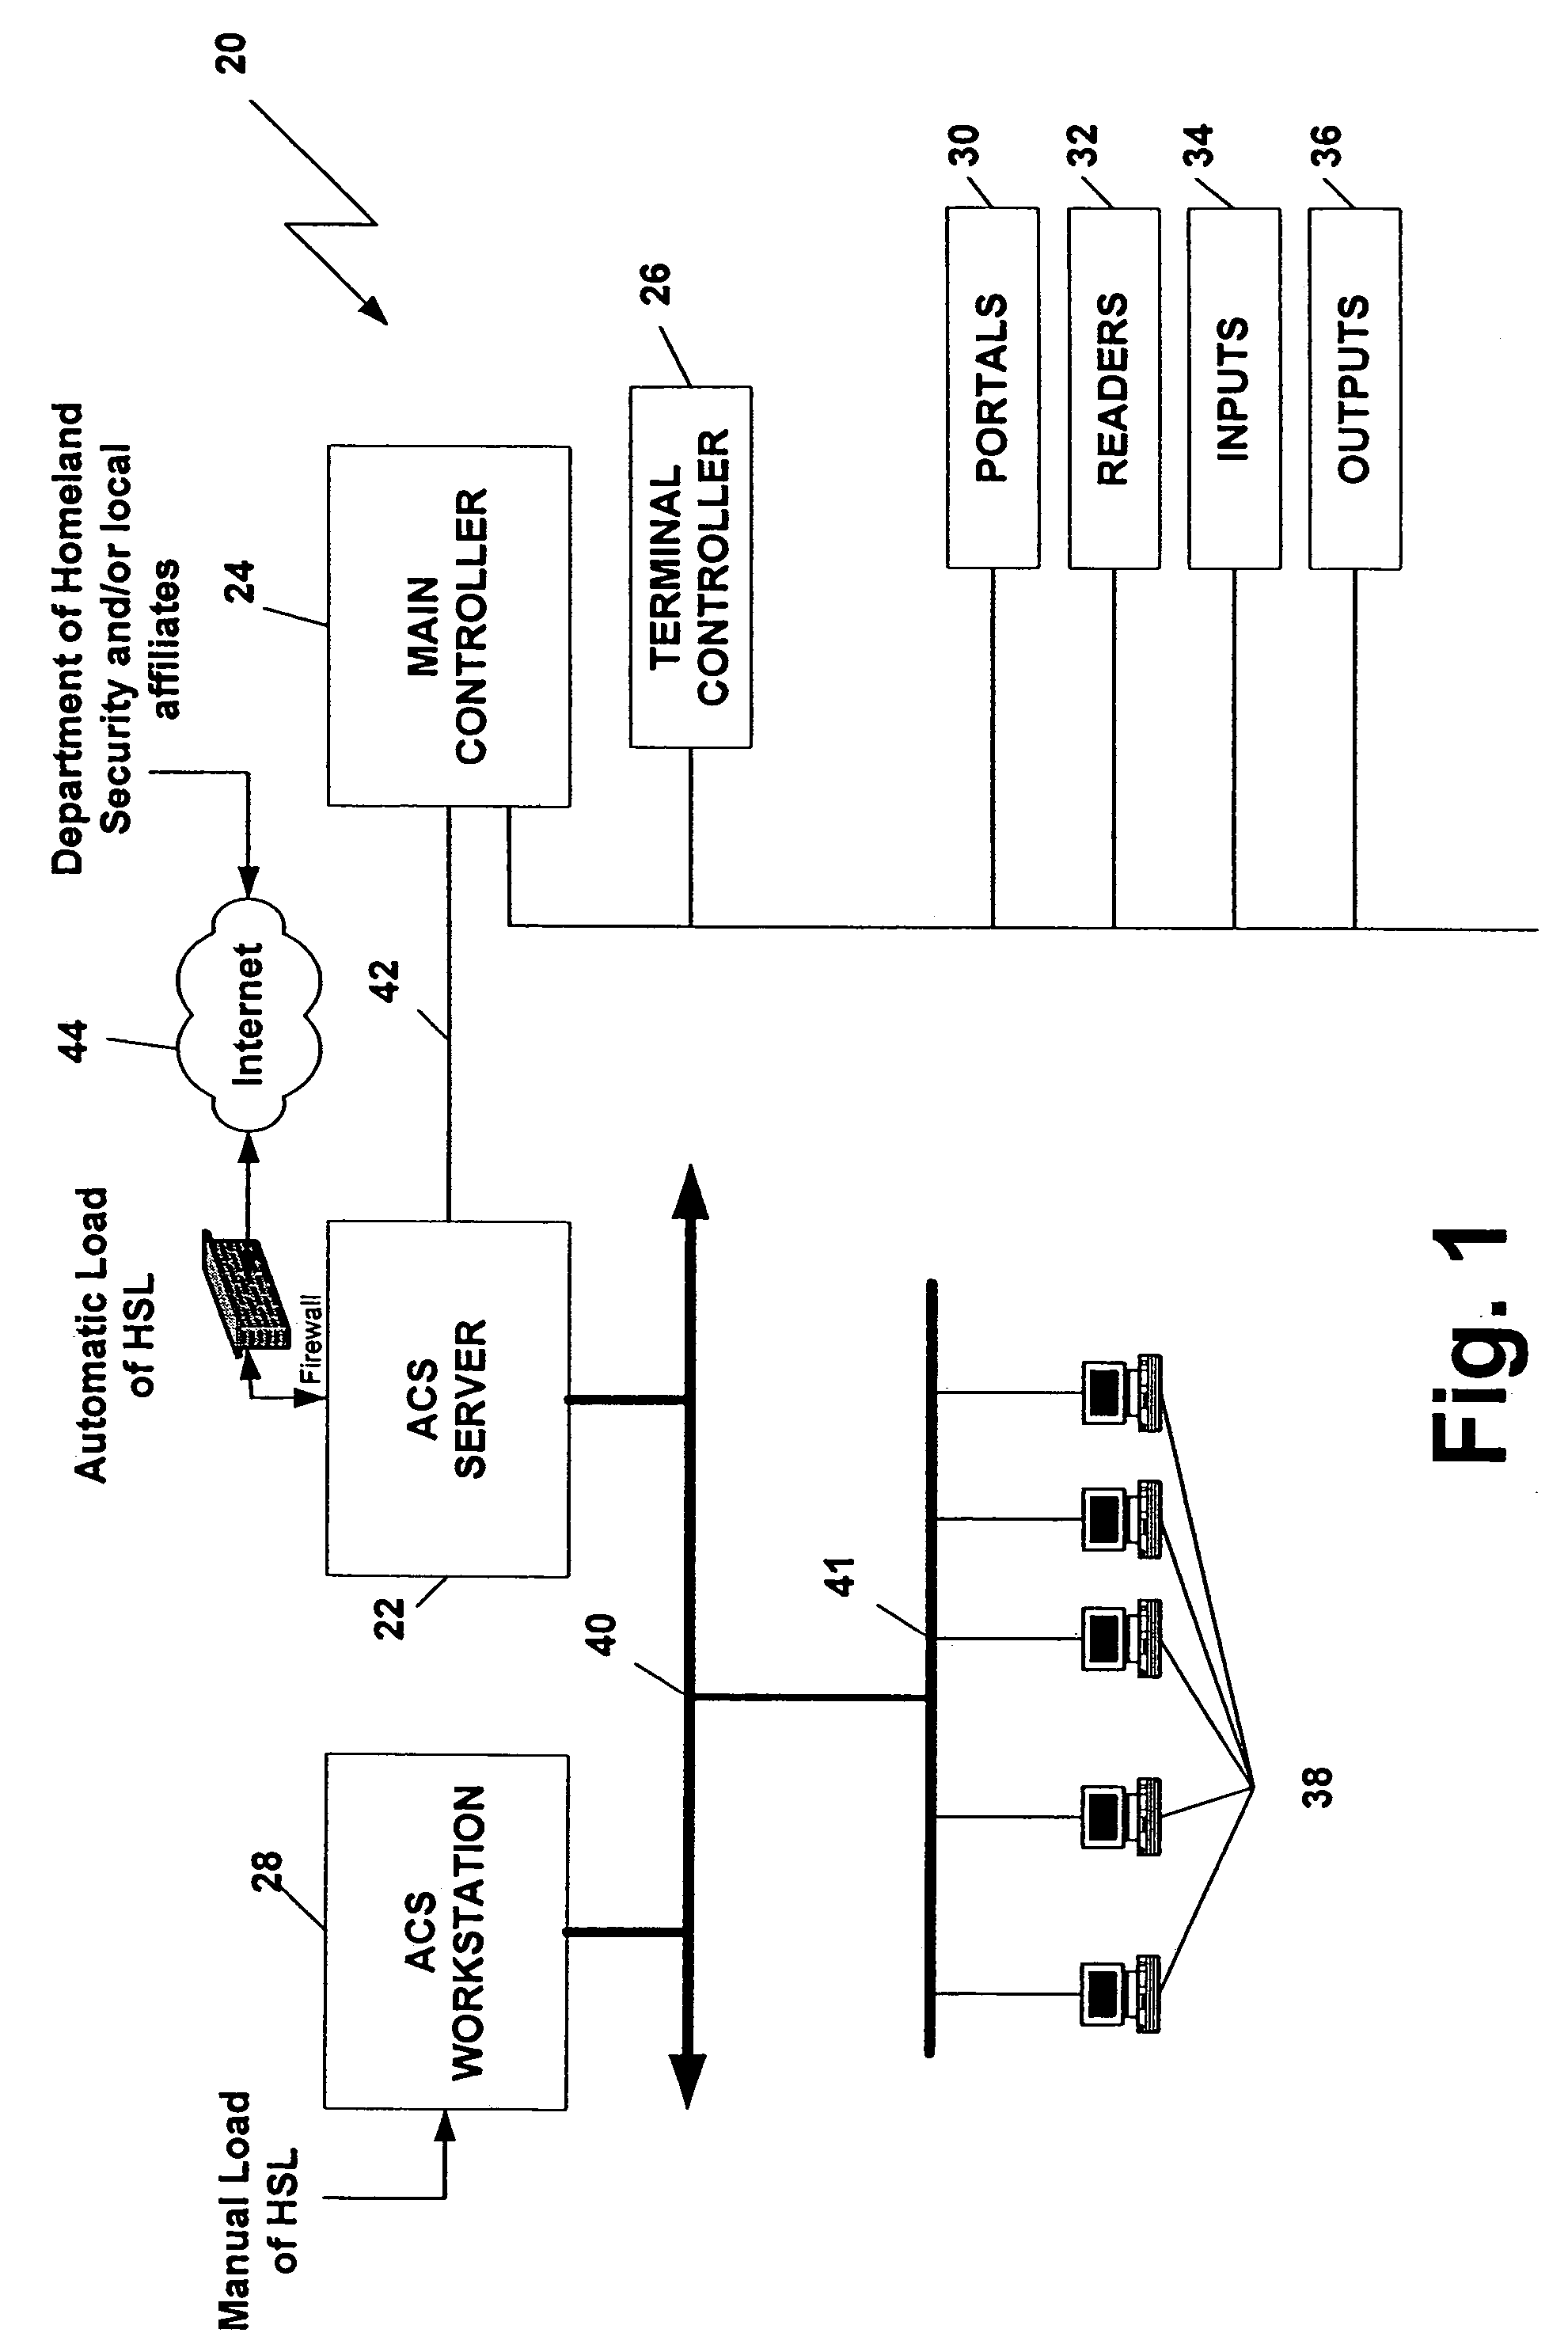 System and method for adjusting access control based on homeland security levels